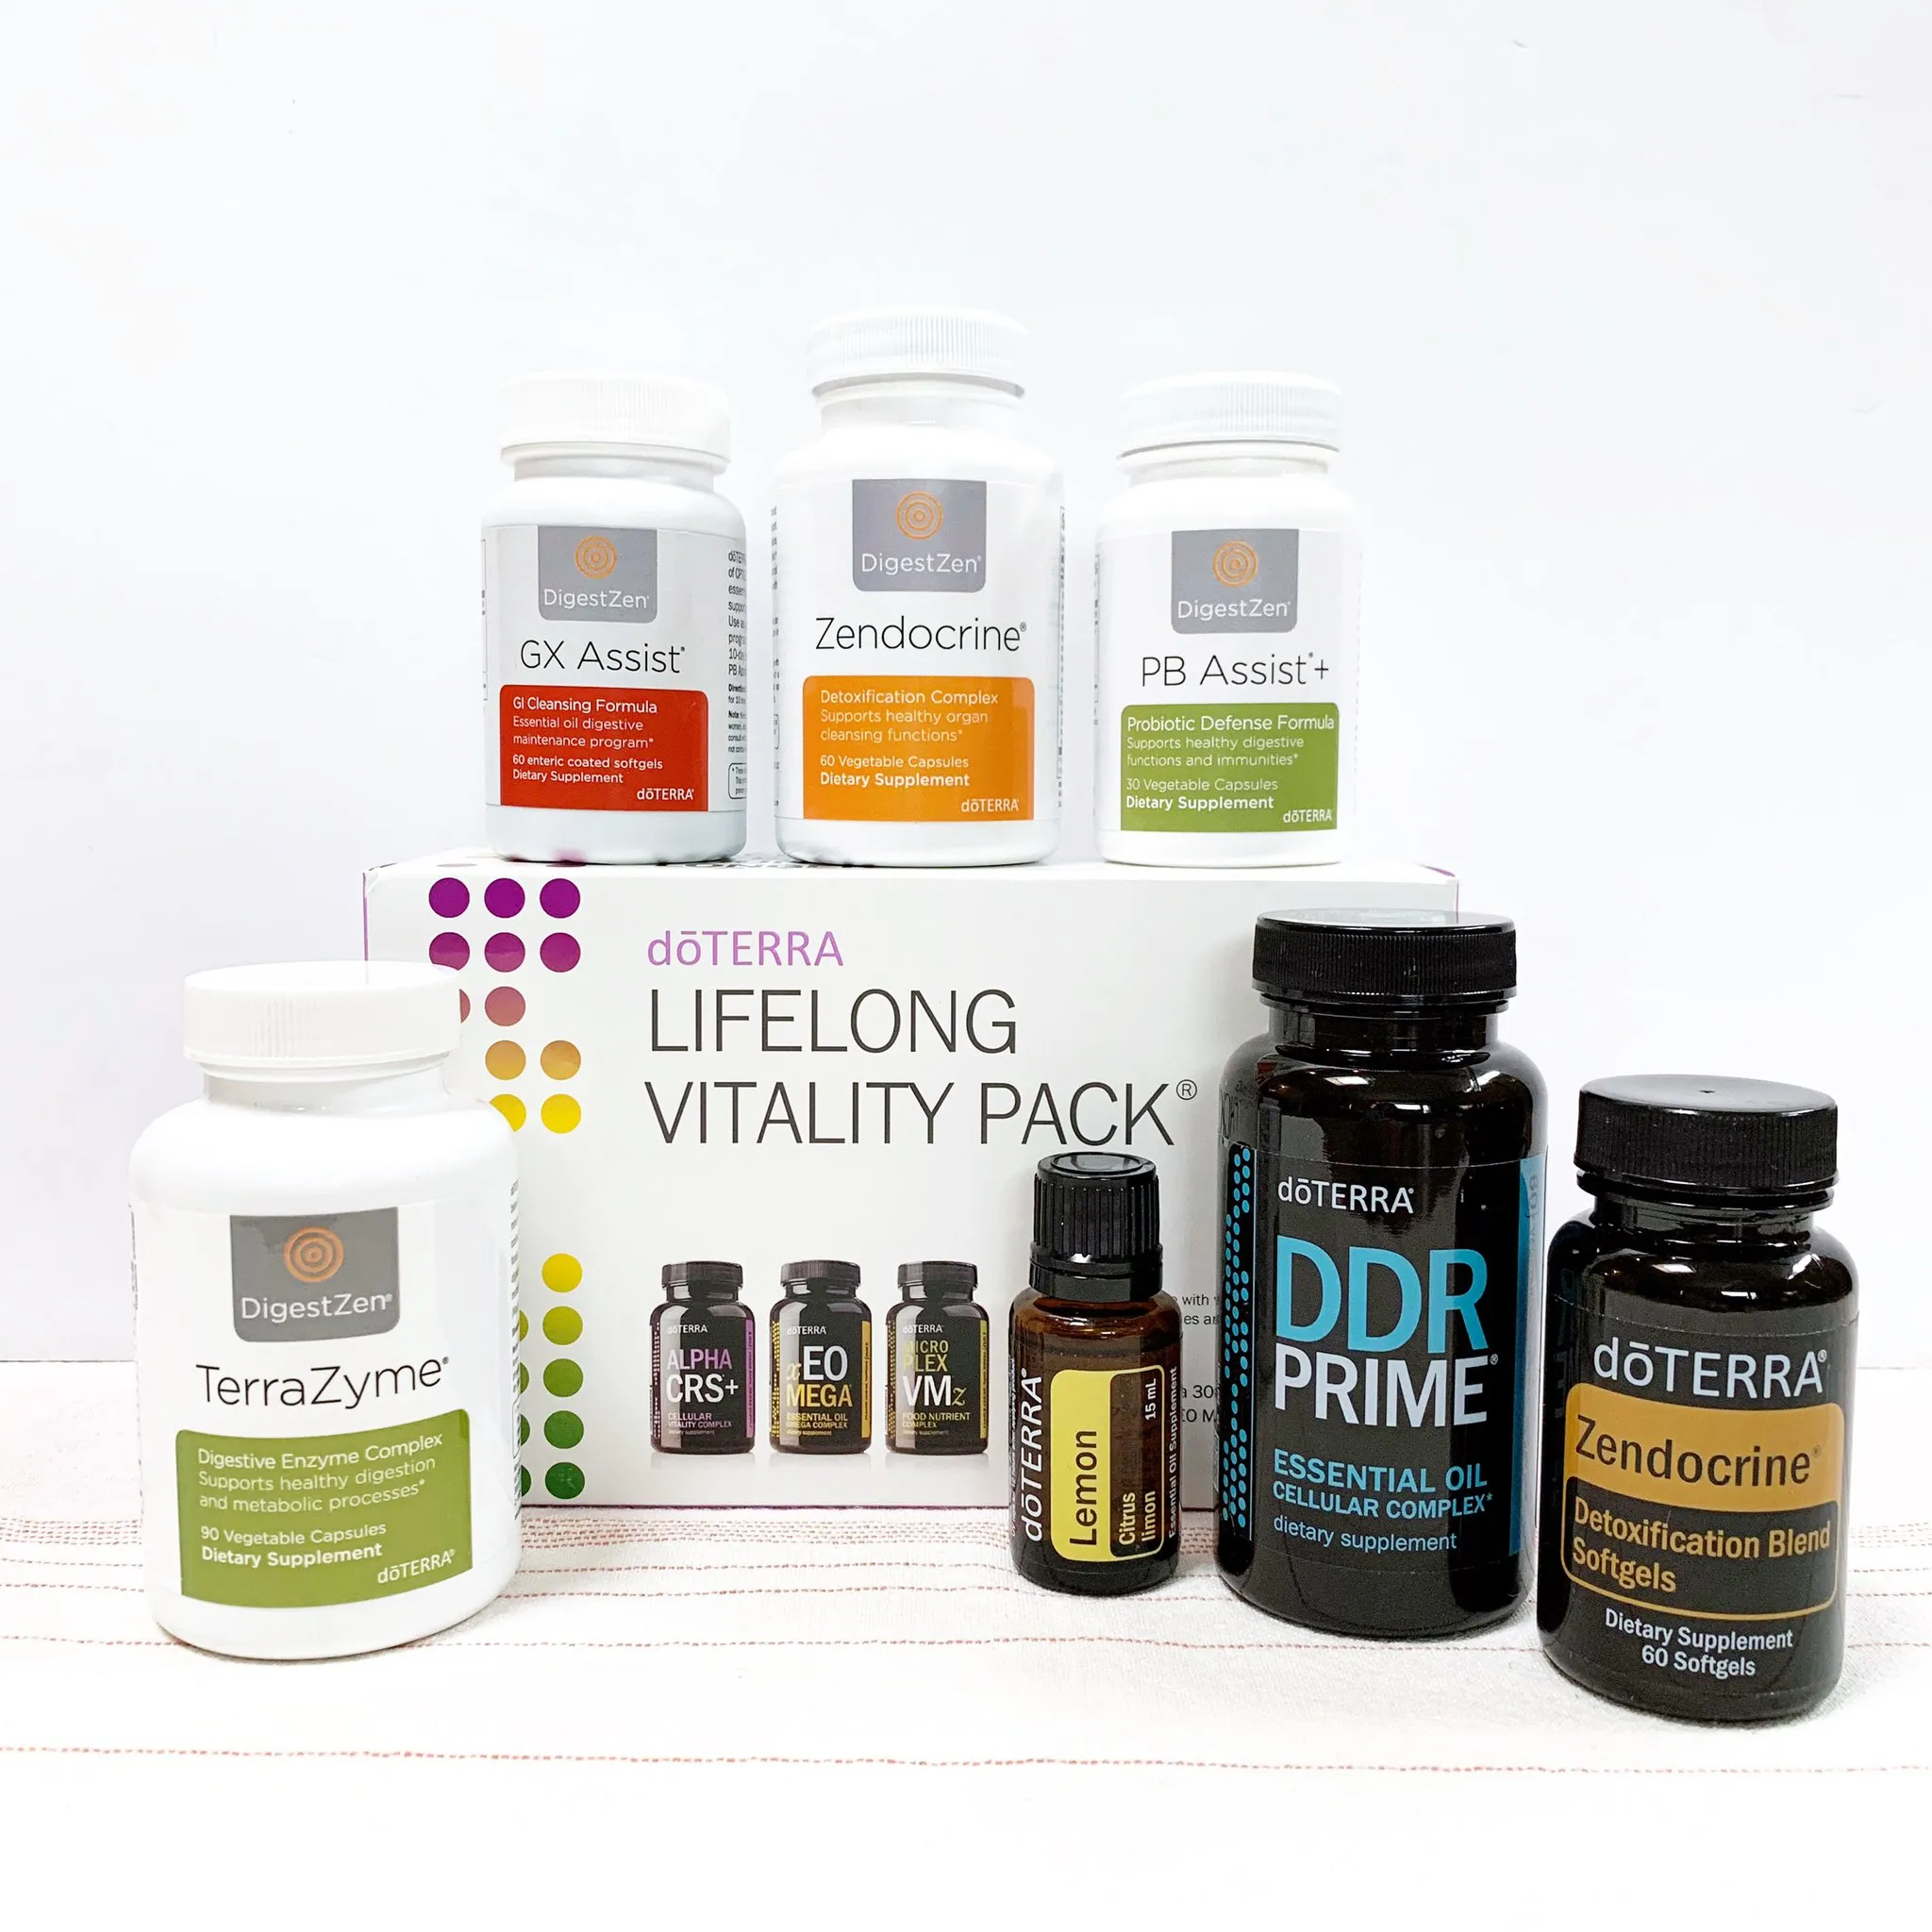 doTERRA cleanse and restore kit products